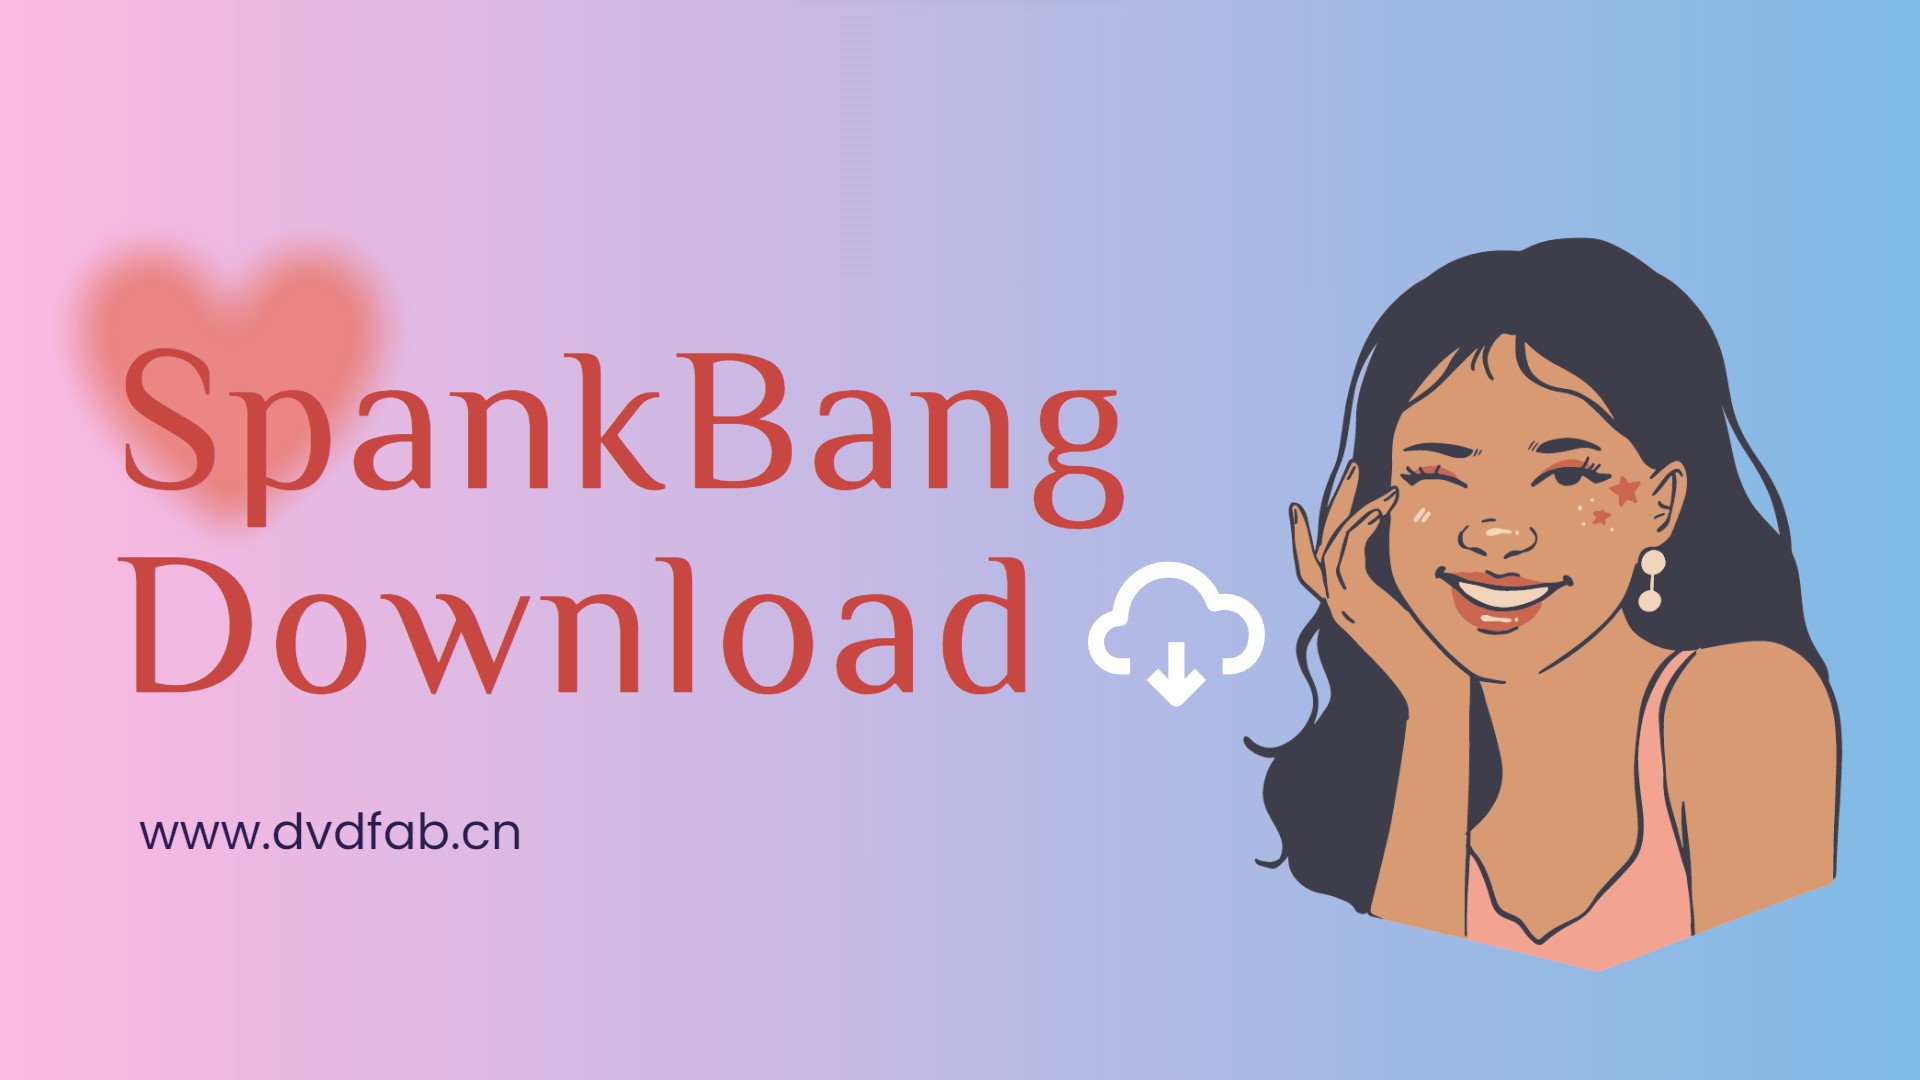 How To Download From Spankbang munching action